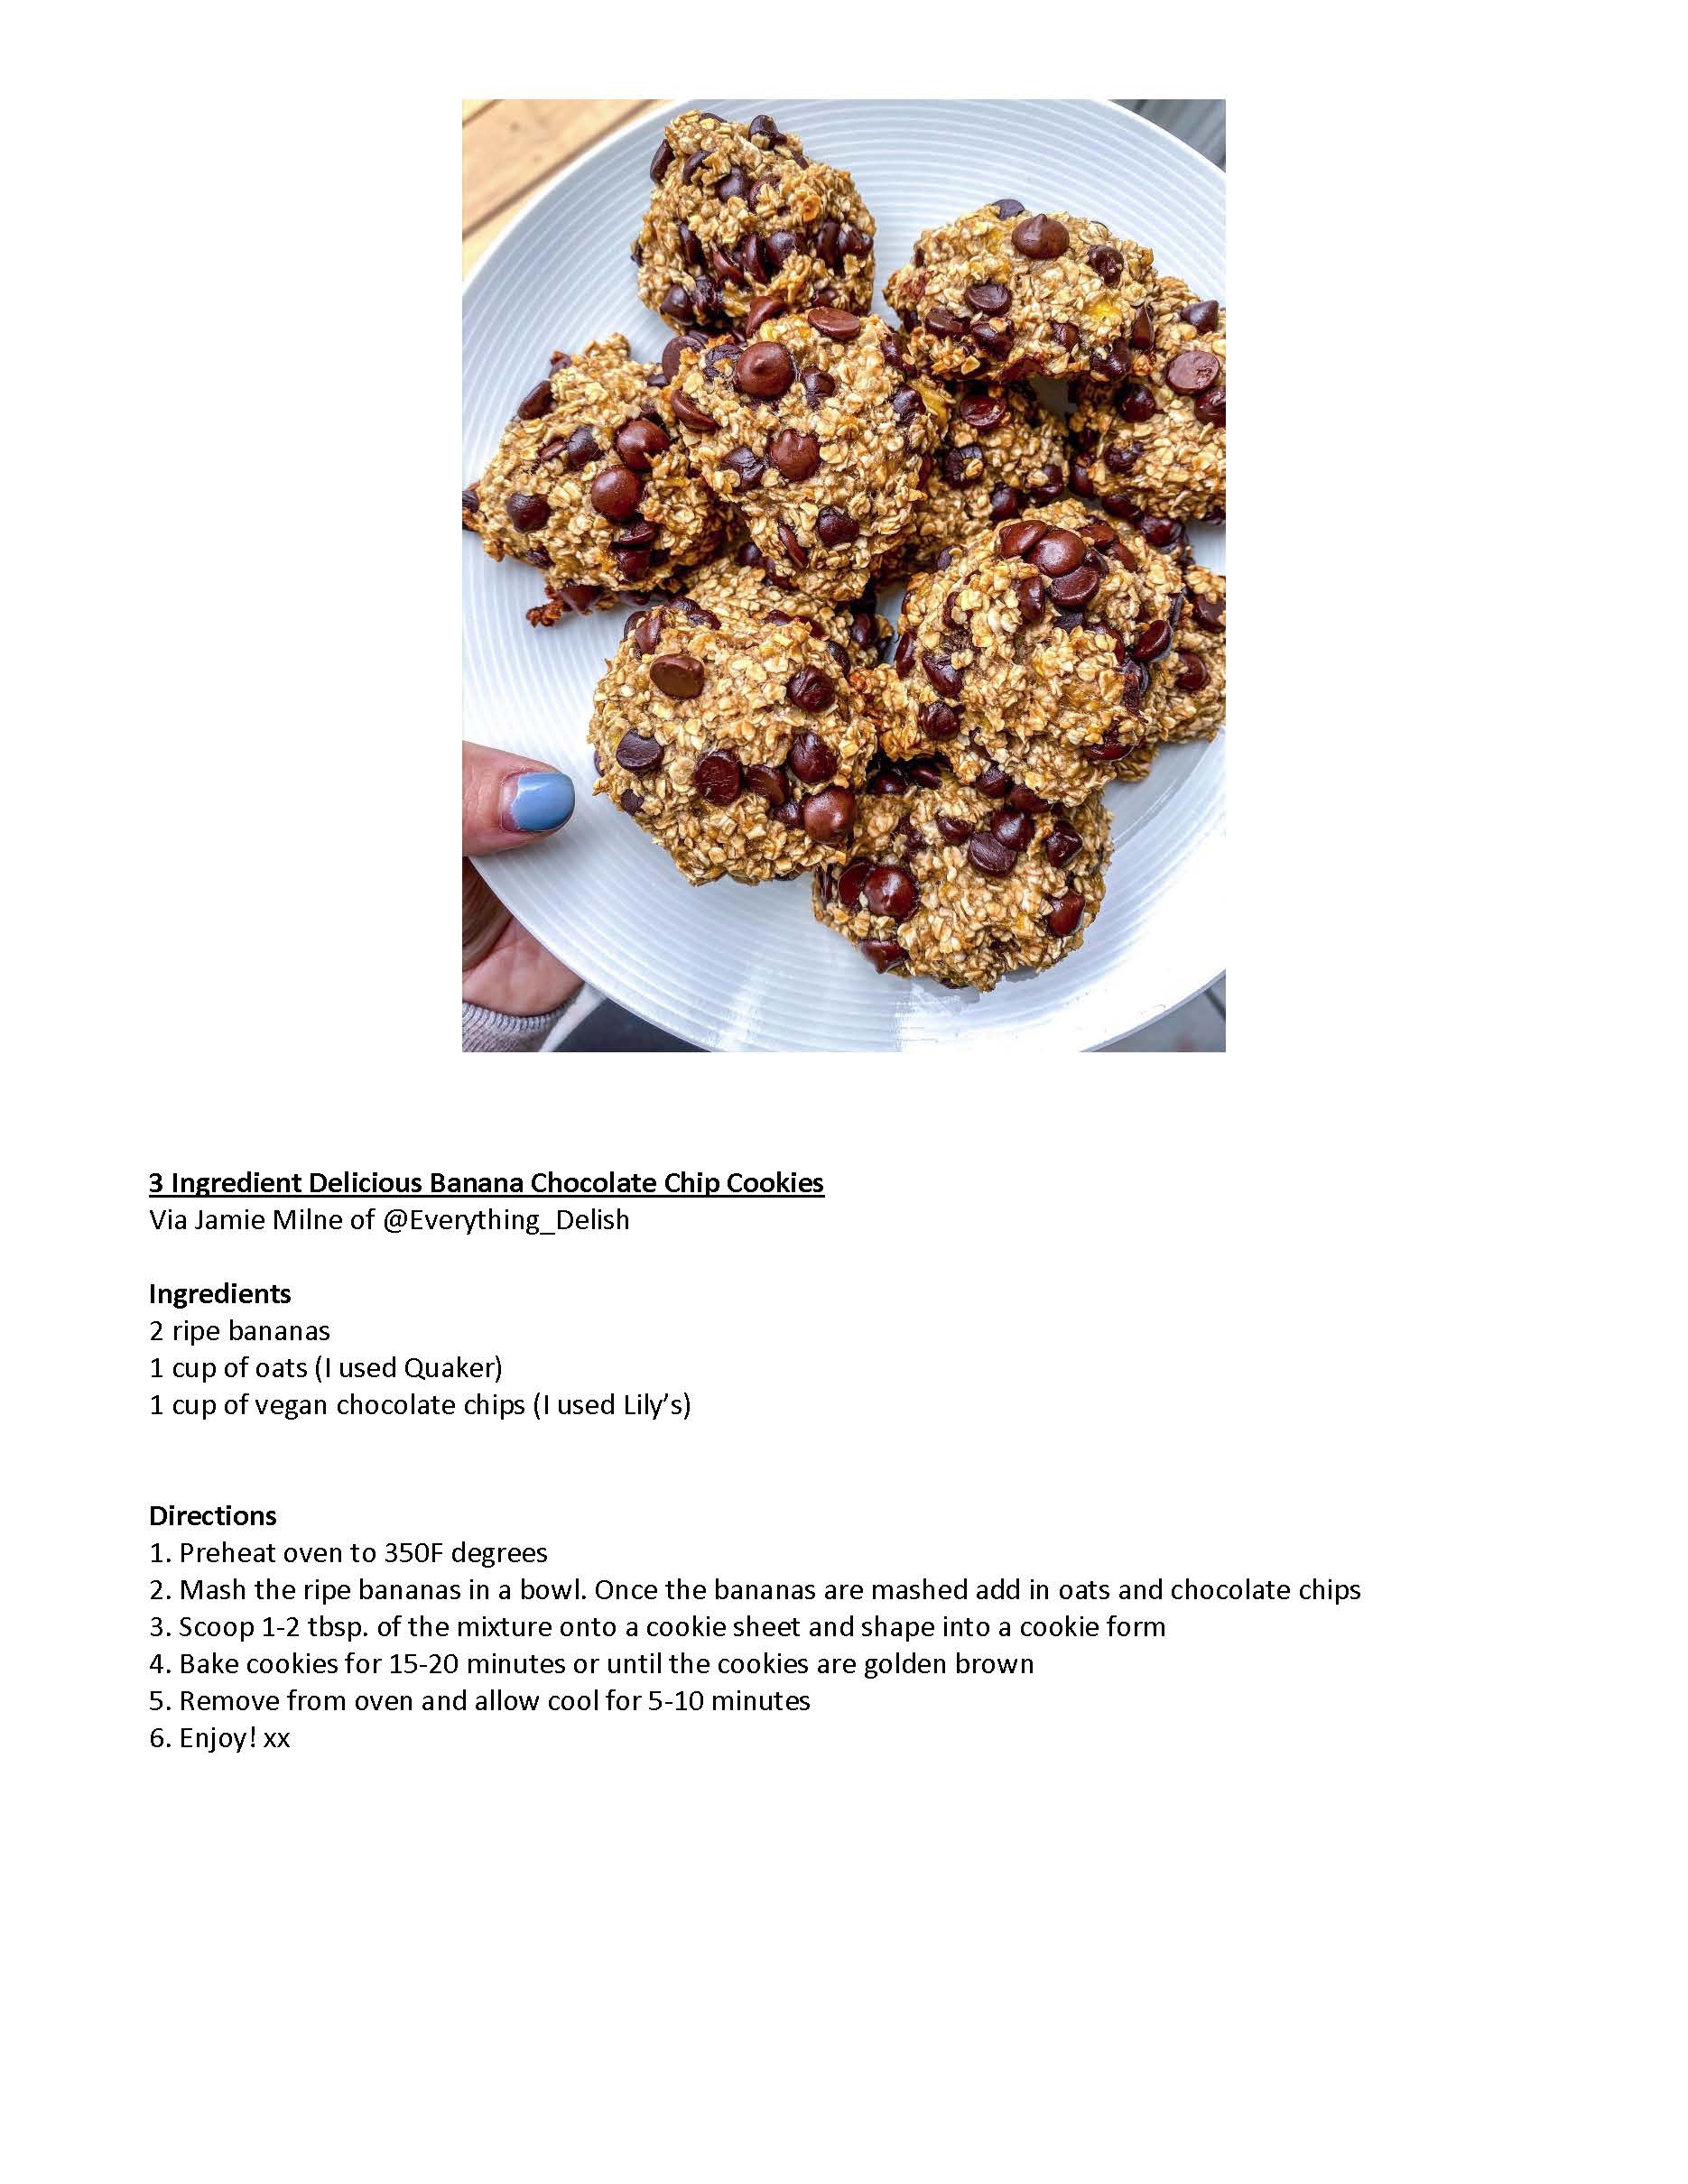 3 Ingredient Delicious Banana Chocolate Chip Cookies Recipe